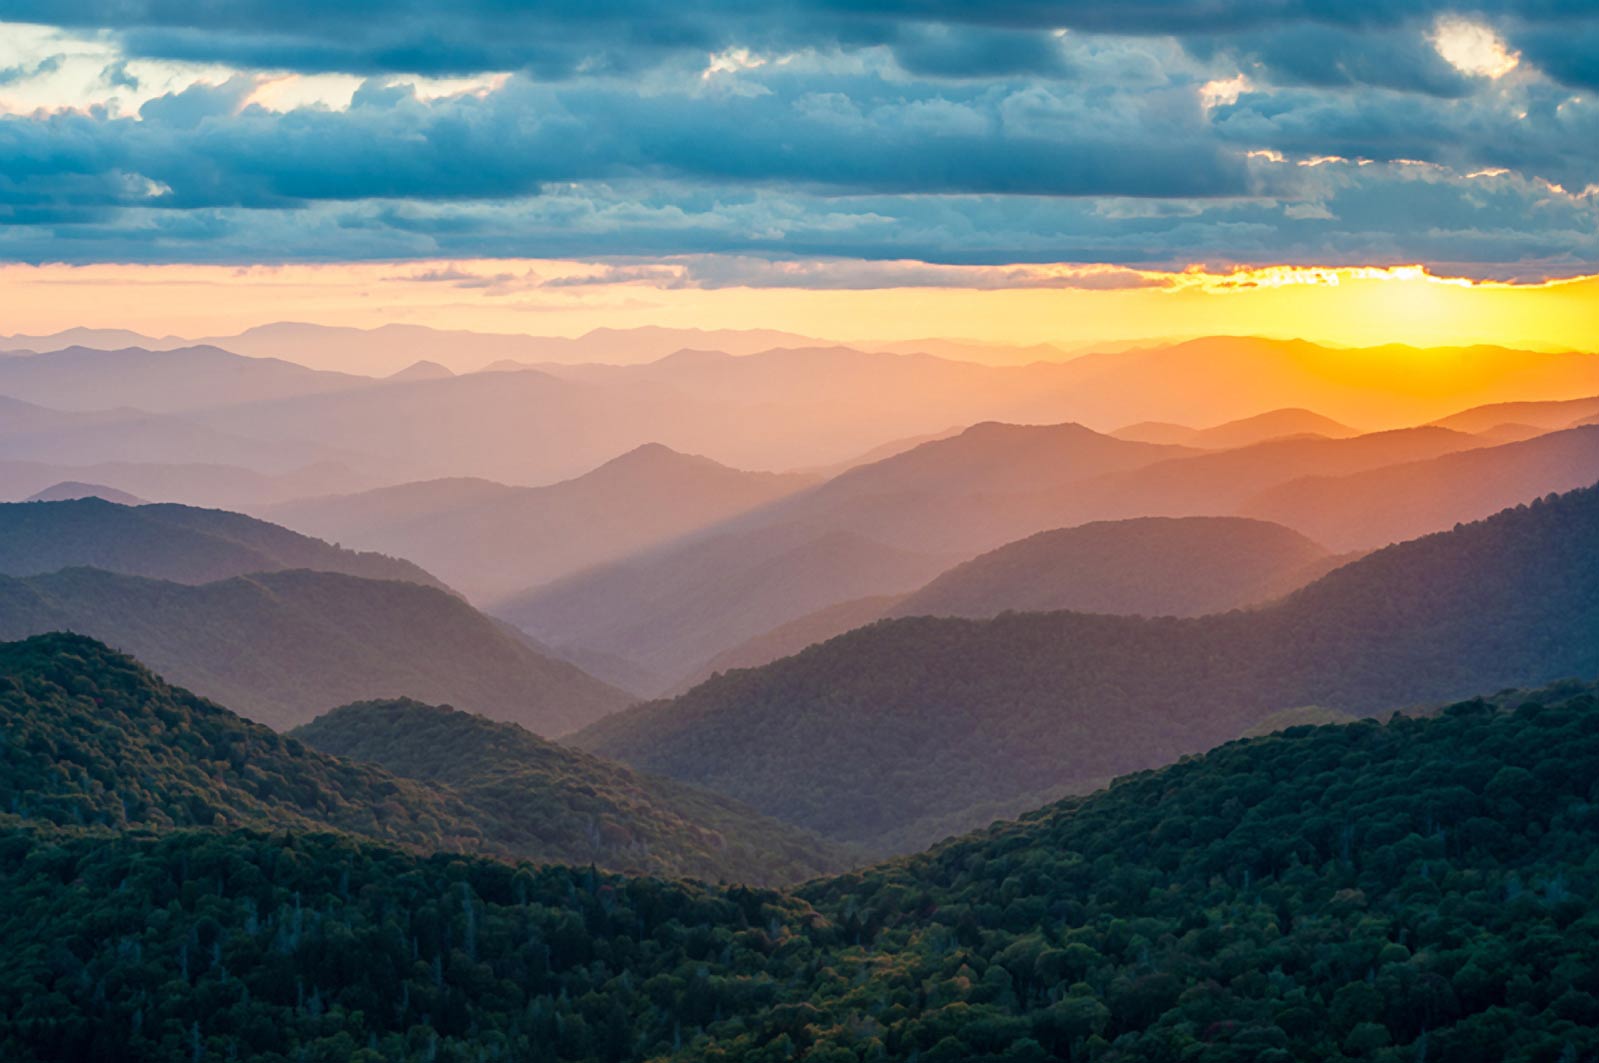 10 Best Viewpoints in the Blue Ridge Mountains - The Cliffs